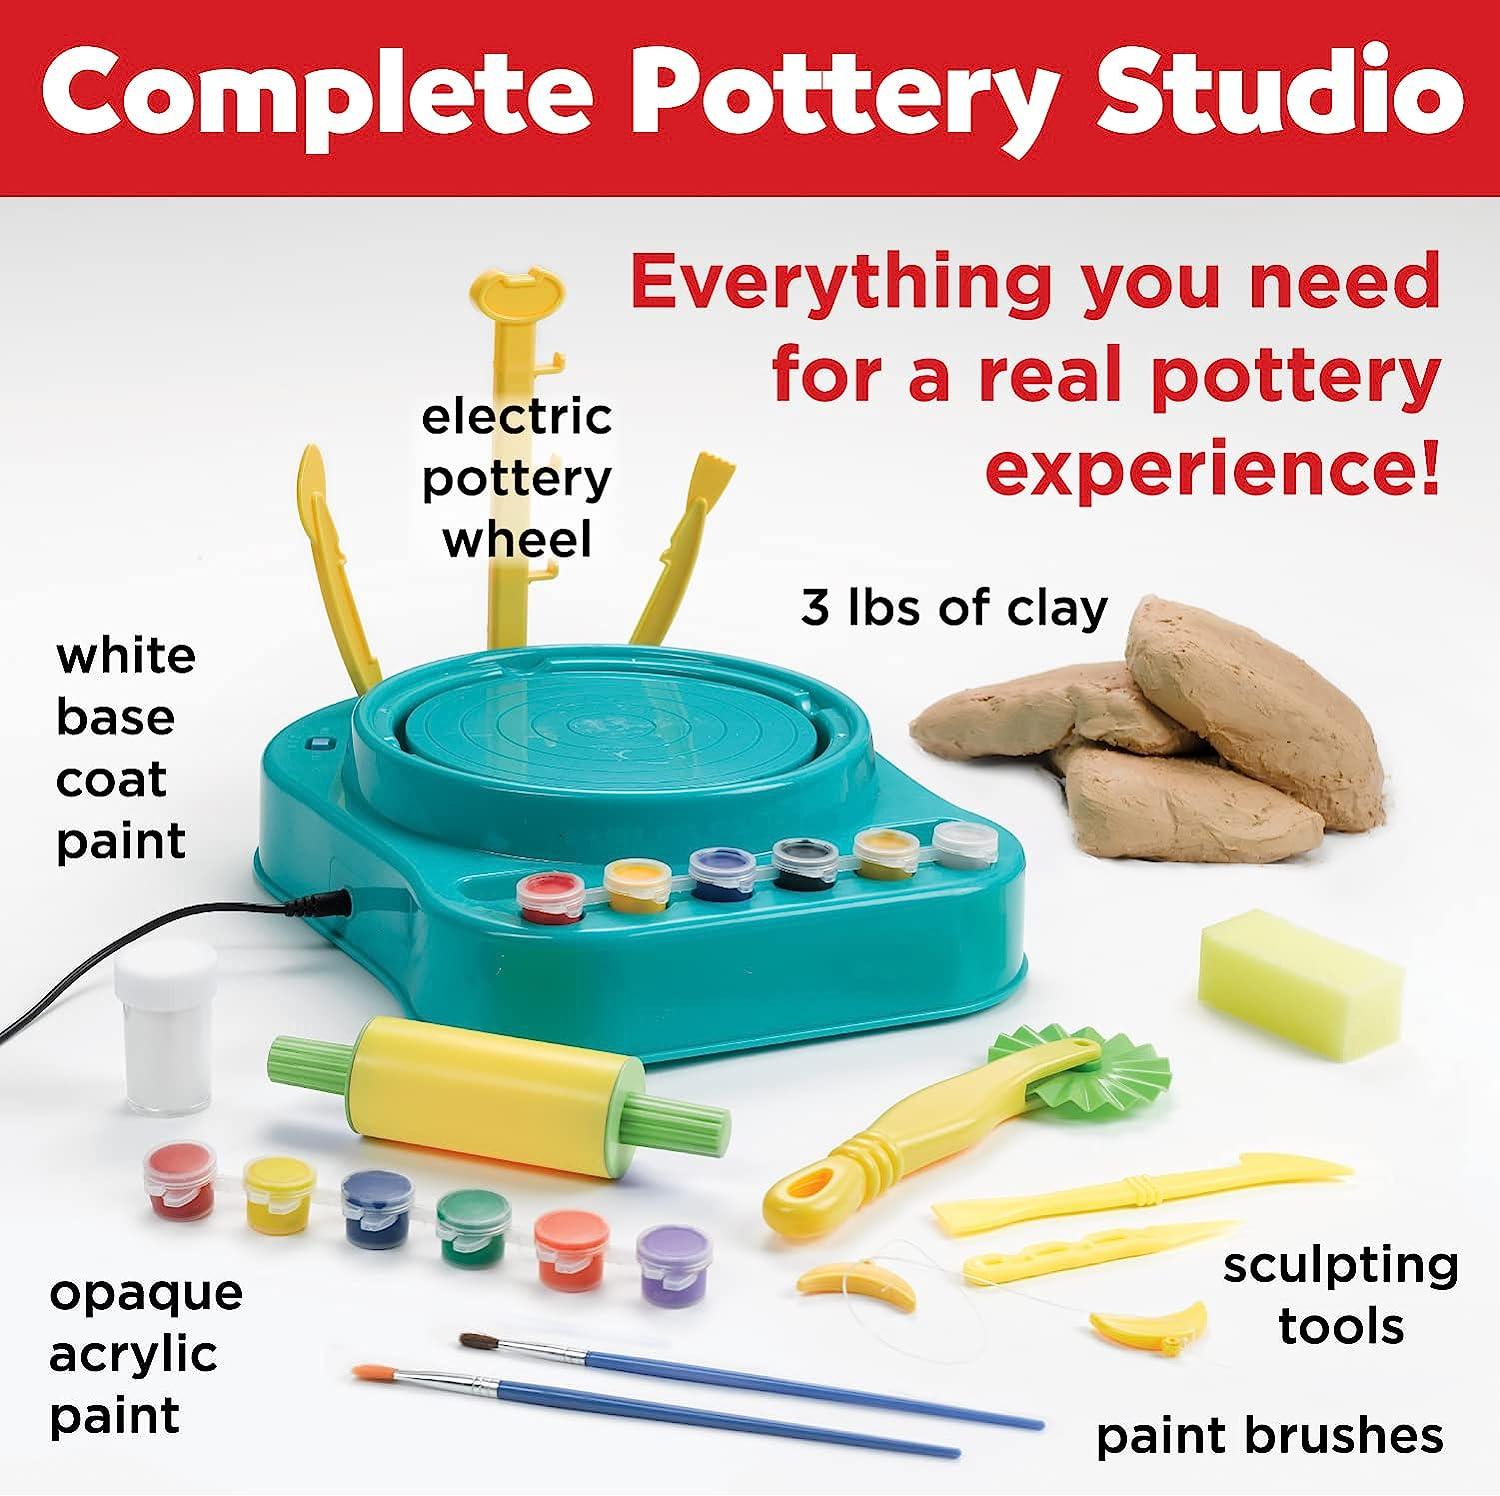  Faber-Castell Pottery Studio - Kids Pottery Wheel Kit for Ages  8+, Complete Pottery Wheel and Painting Kit for Beginners, 3 lbs of  Sculpting Clay and Tools : Arts, Crafts & Sewing